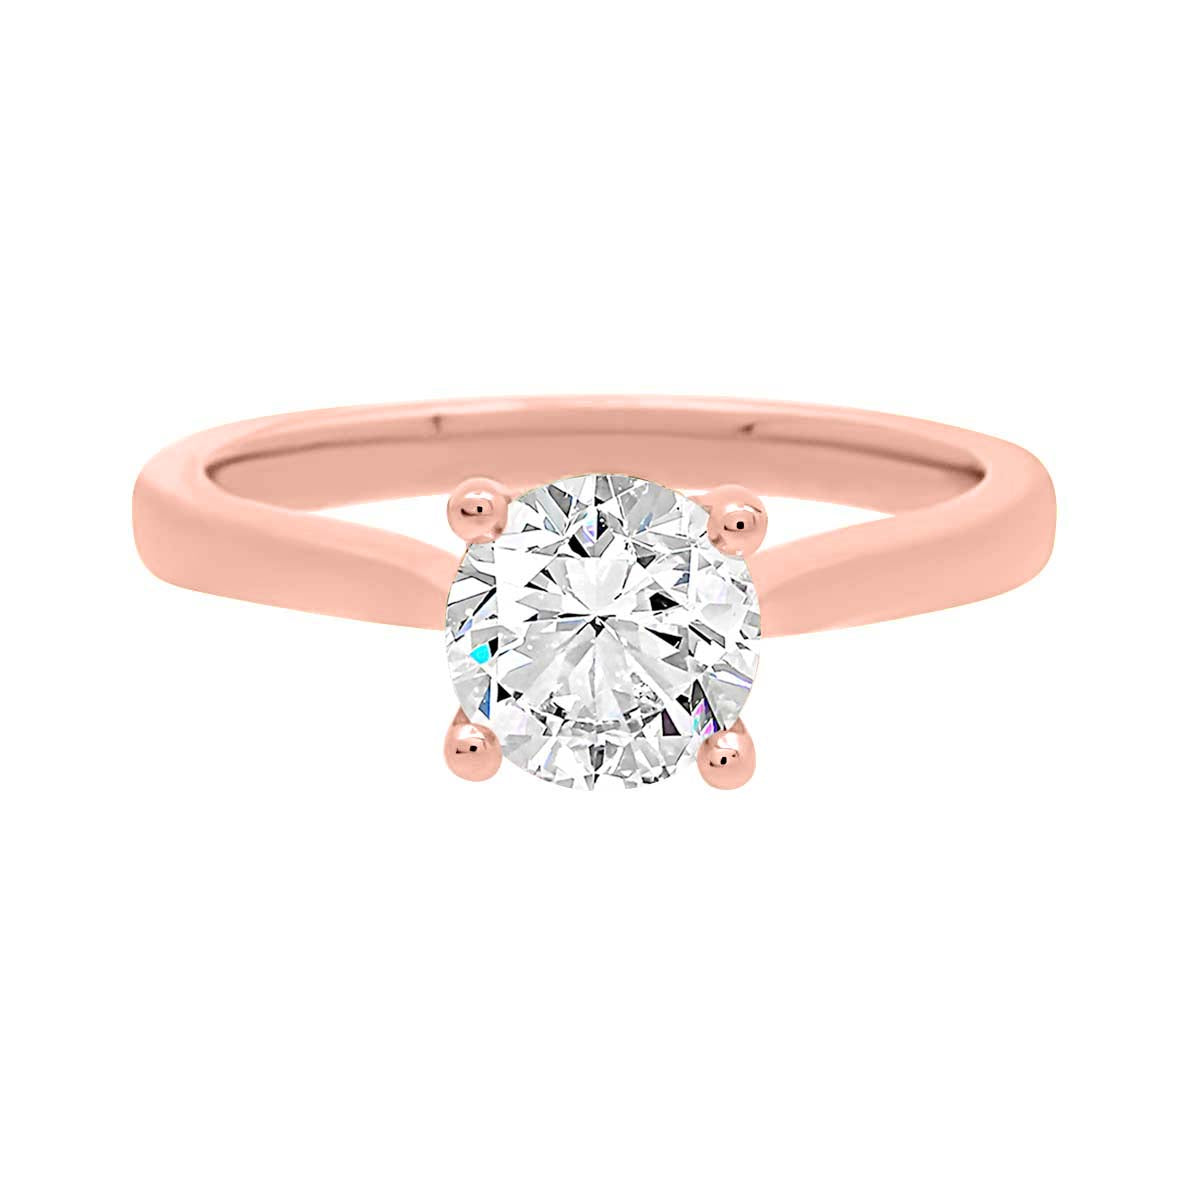 Hidden Halo Solitaire Engagement Ring in rose gold and upright position lying flat